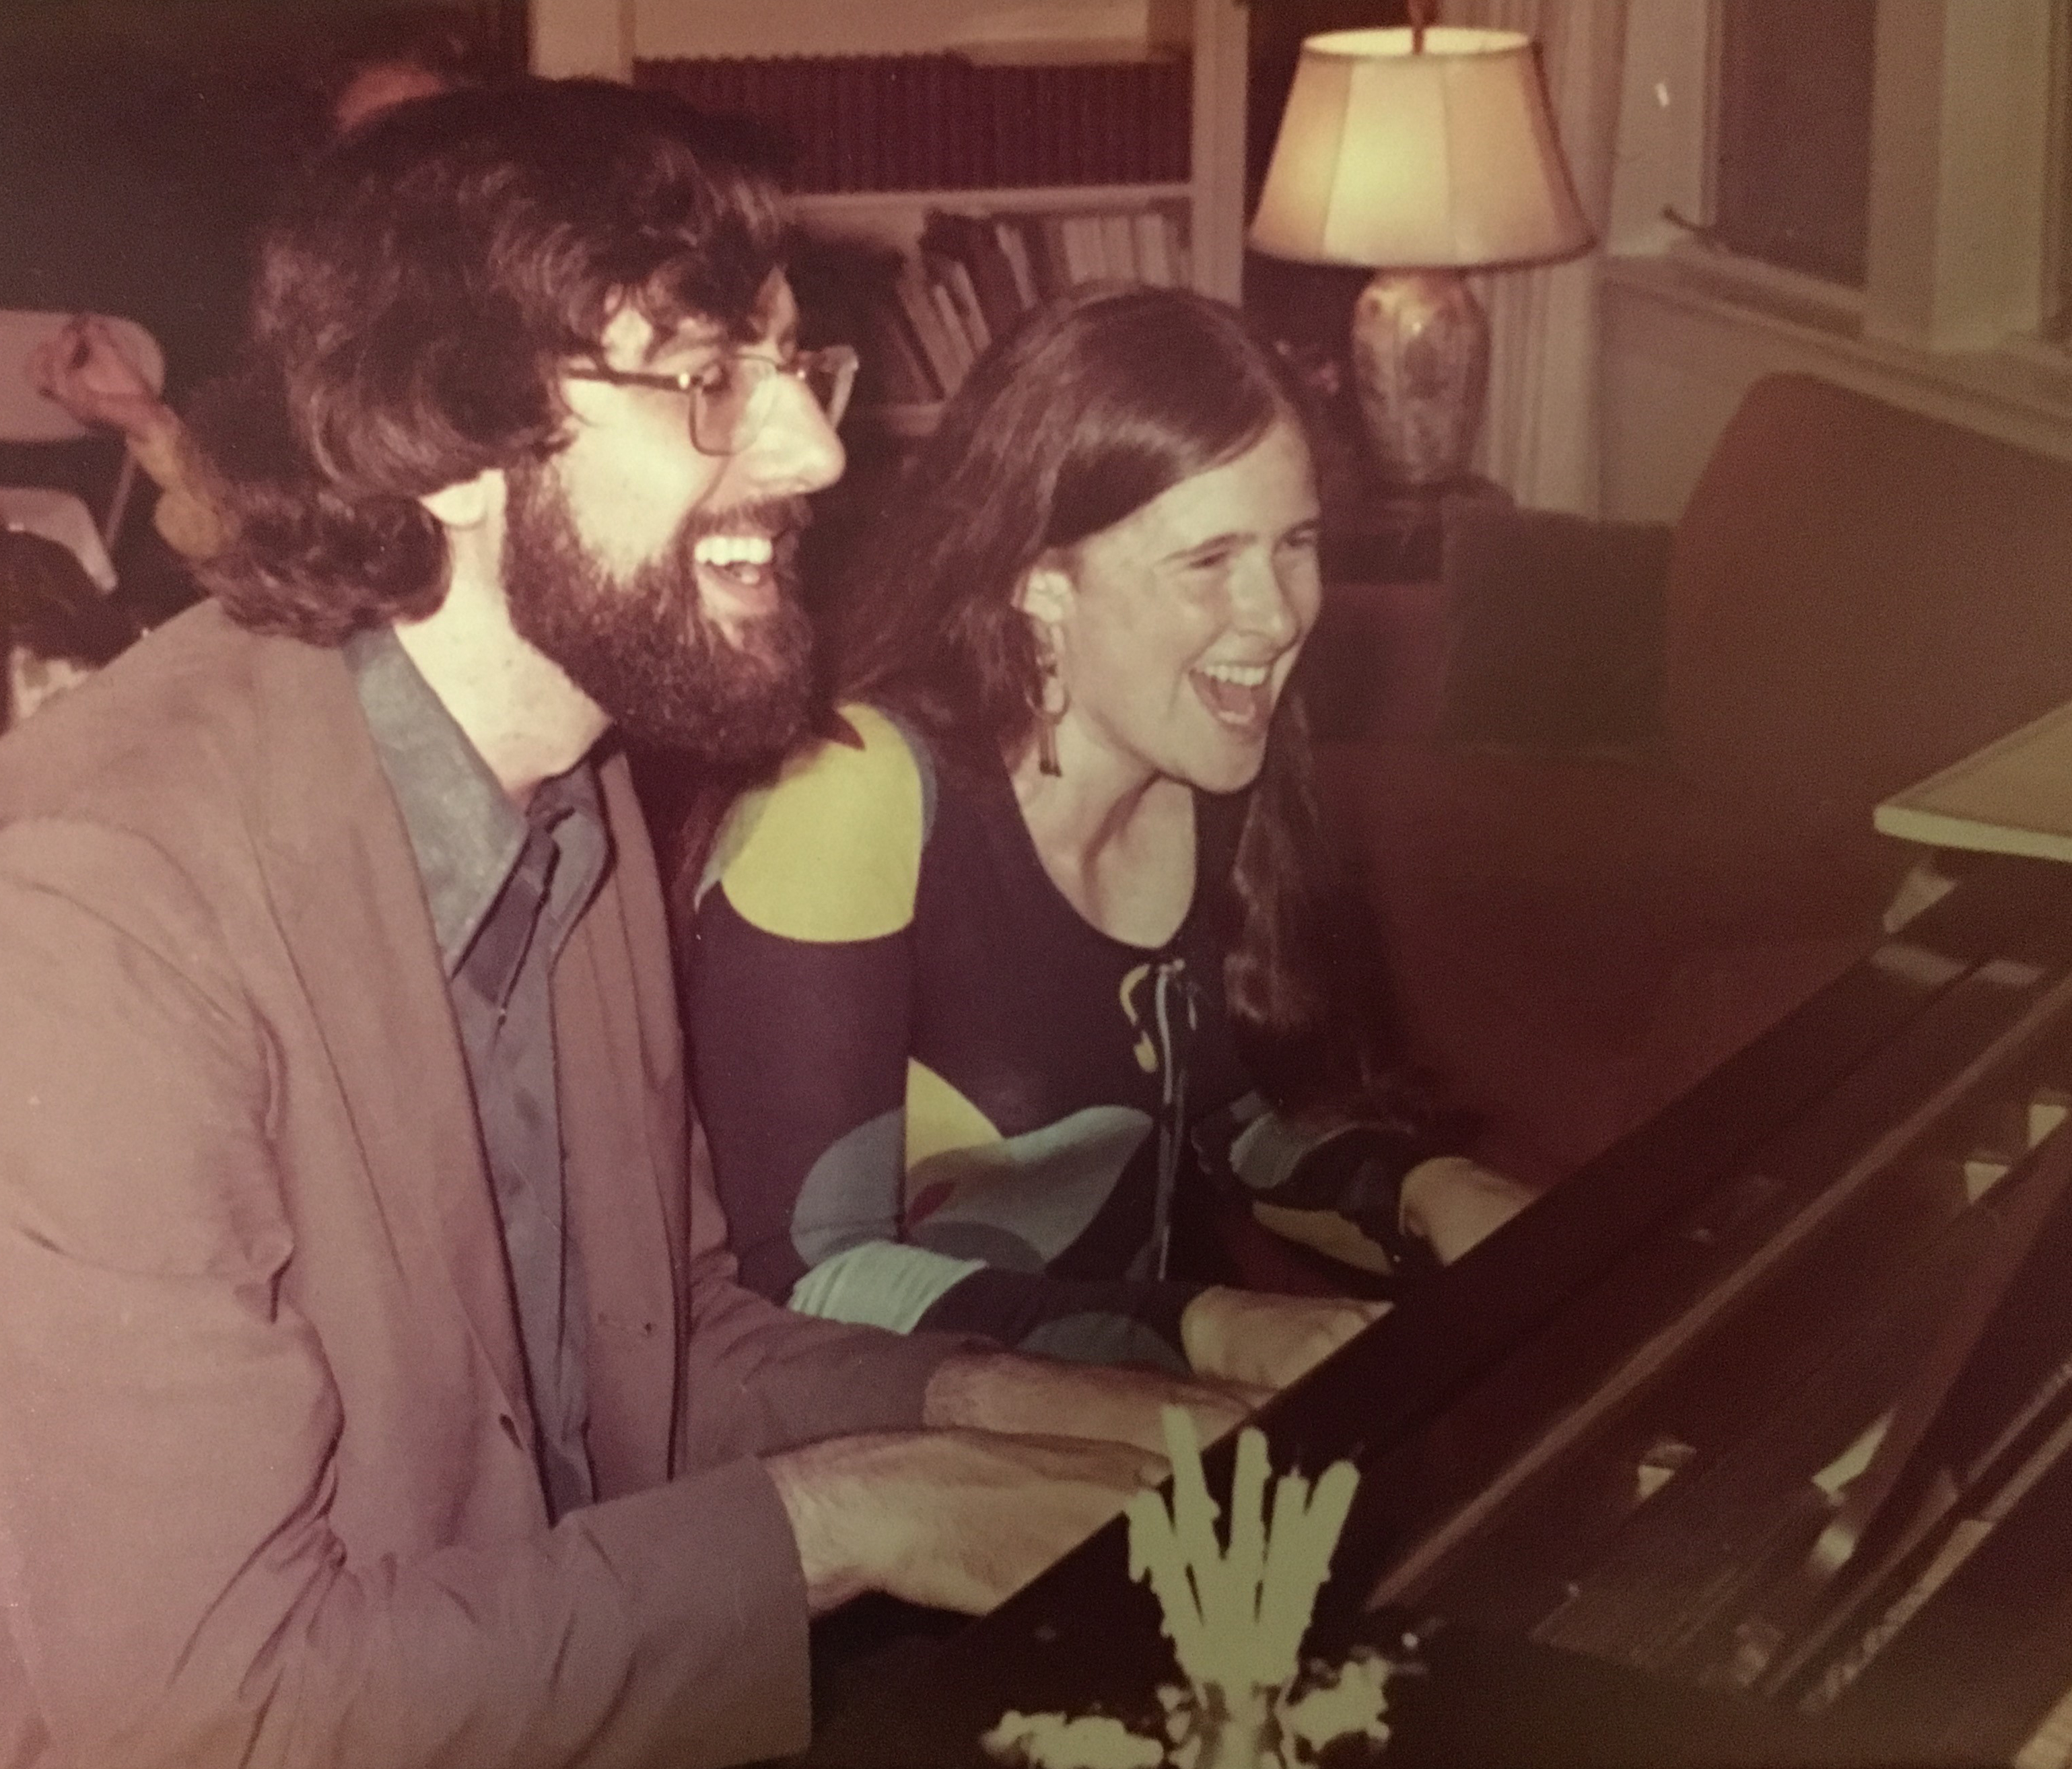 Joel Gressel and Eleanor Cory laughing while playing on a piano together.